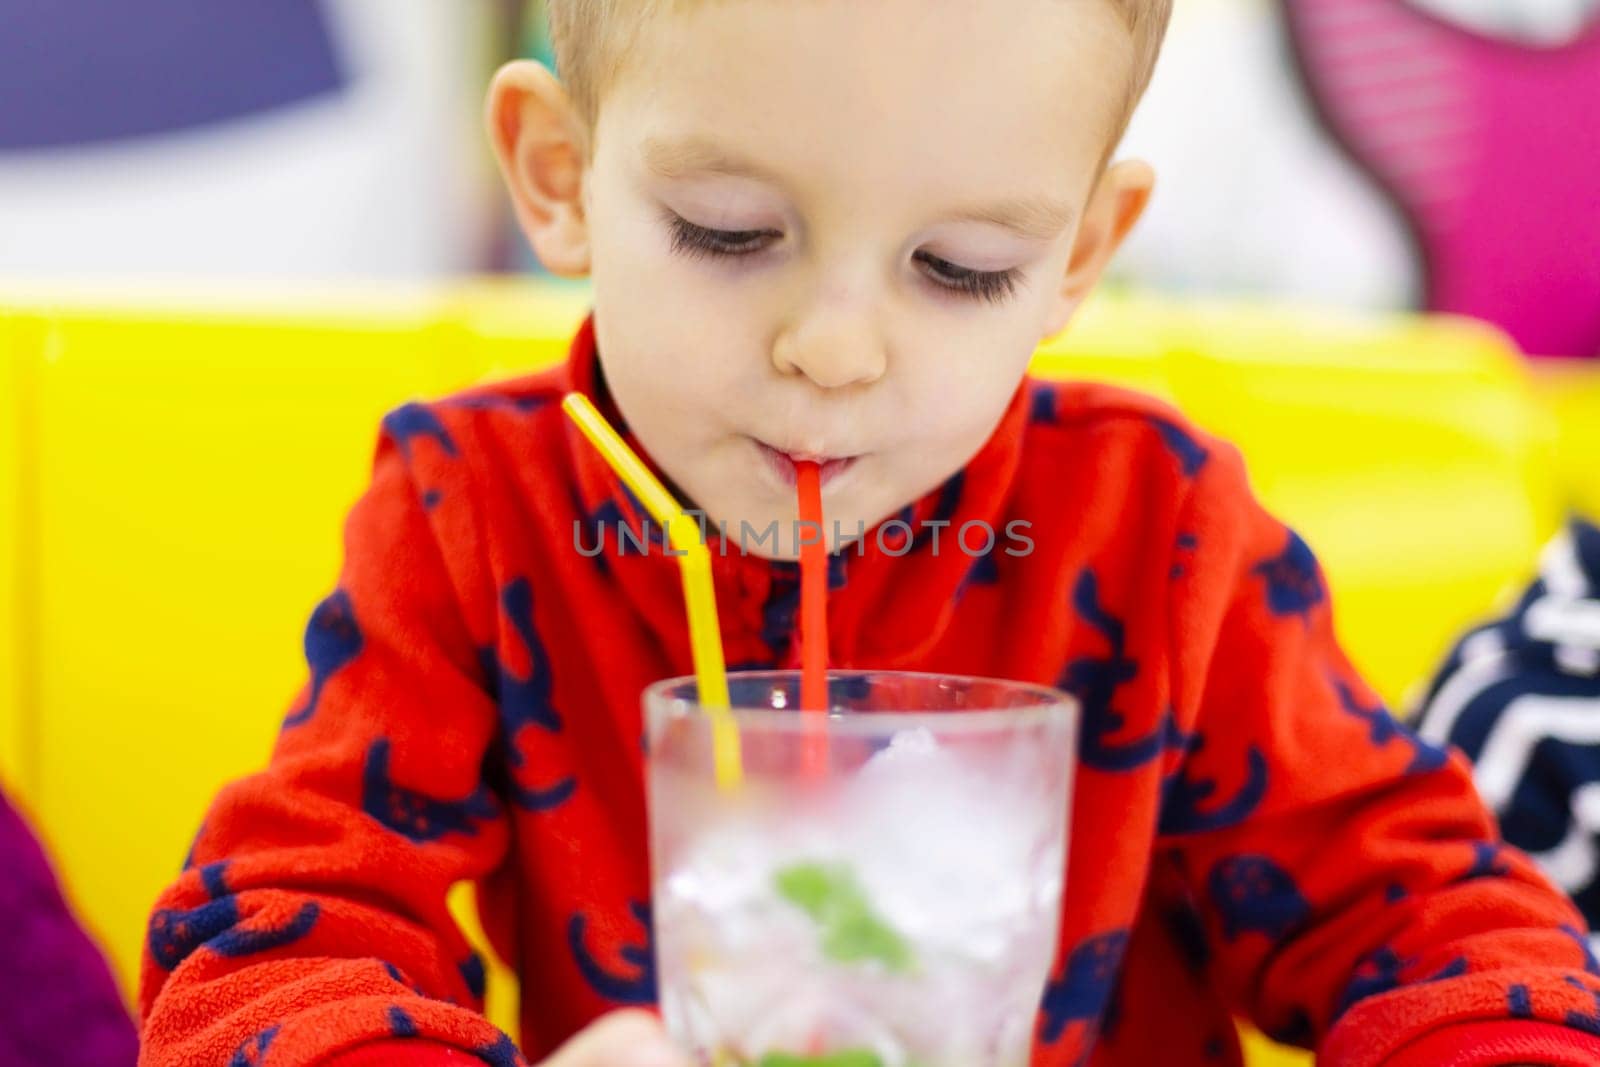 Little boy sipping water with mint leaves through a straw from a clear glass by andreyz